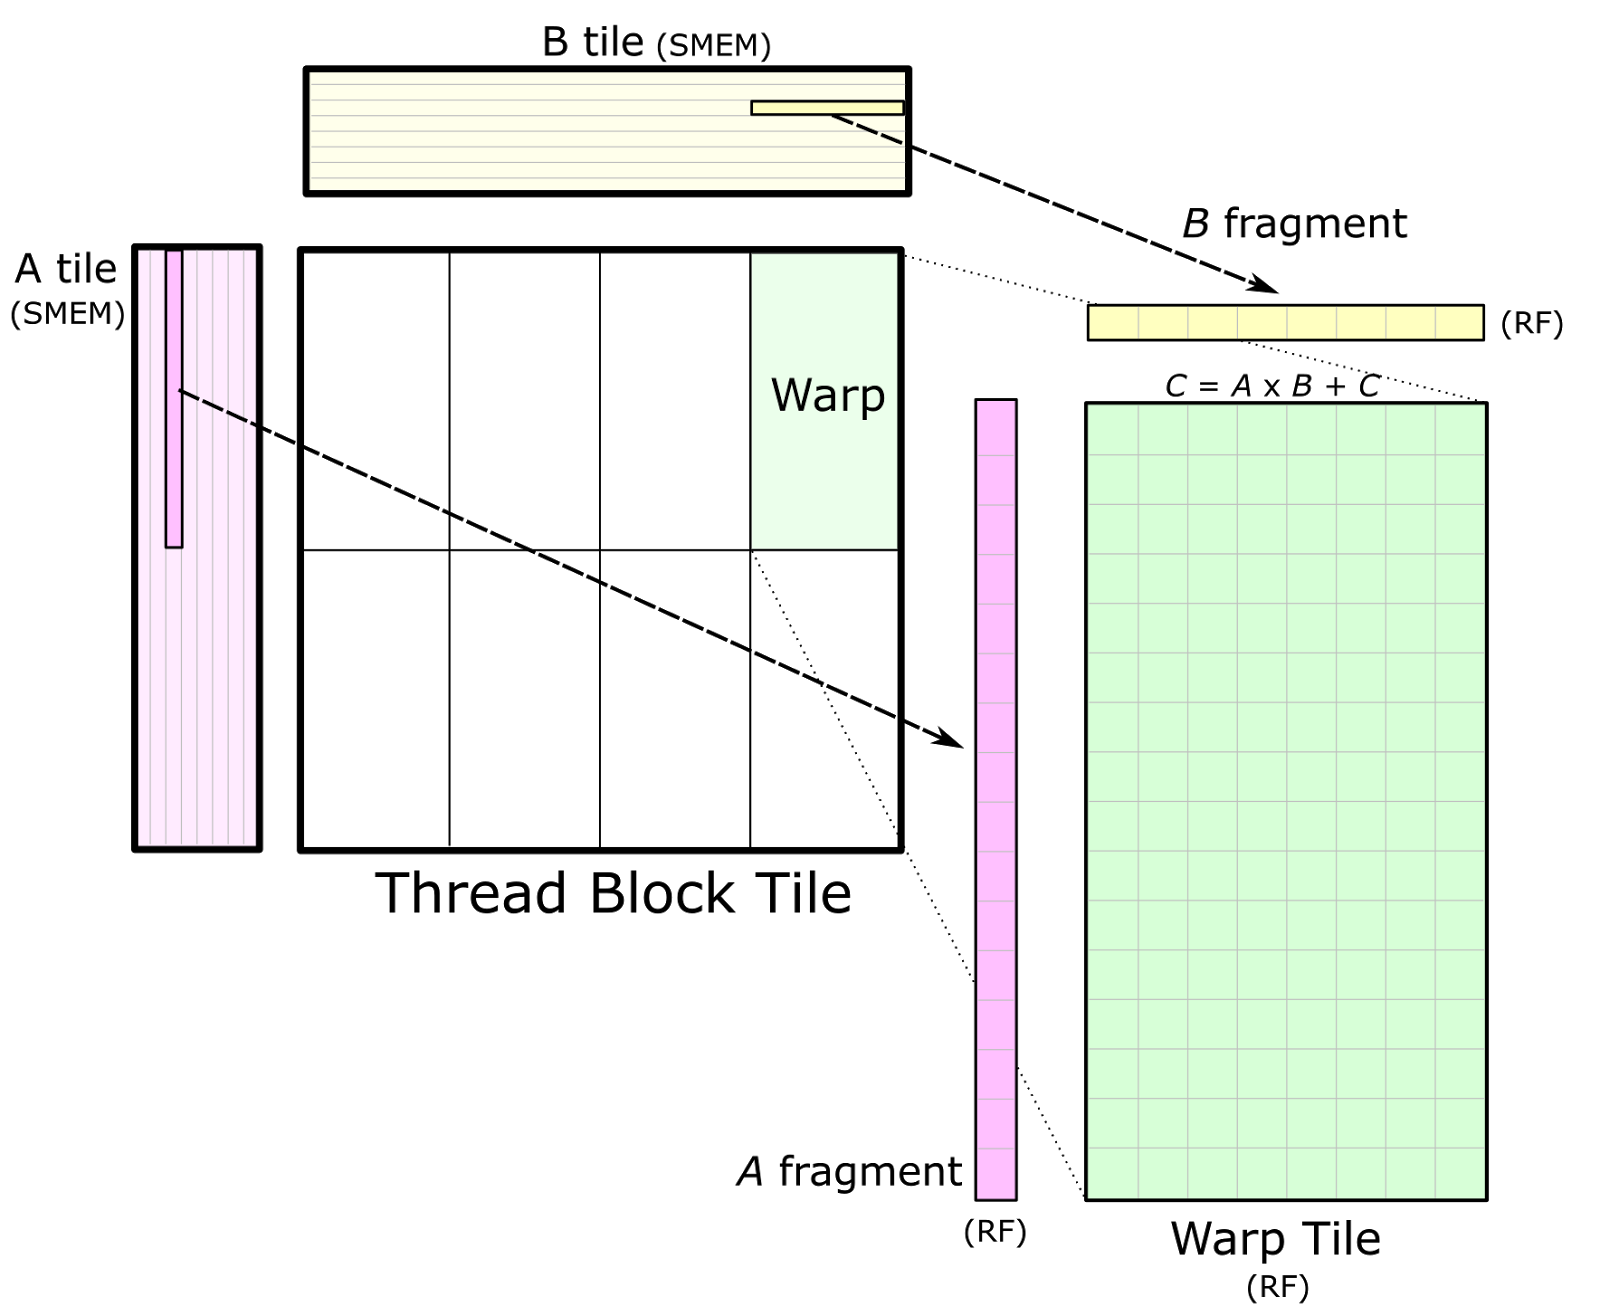 Figure 4. An individual warp computes an accumulated matrix product by iteratively loading fragments of A and B from the corresponding shared memory (SMEM) tiles into registers (RF) and computing an outer product.